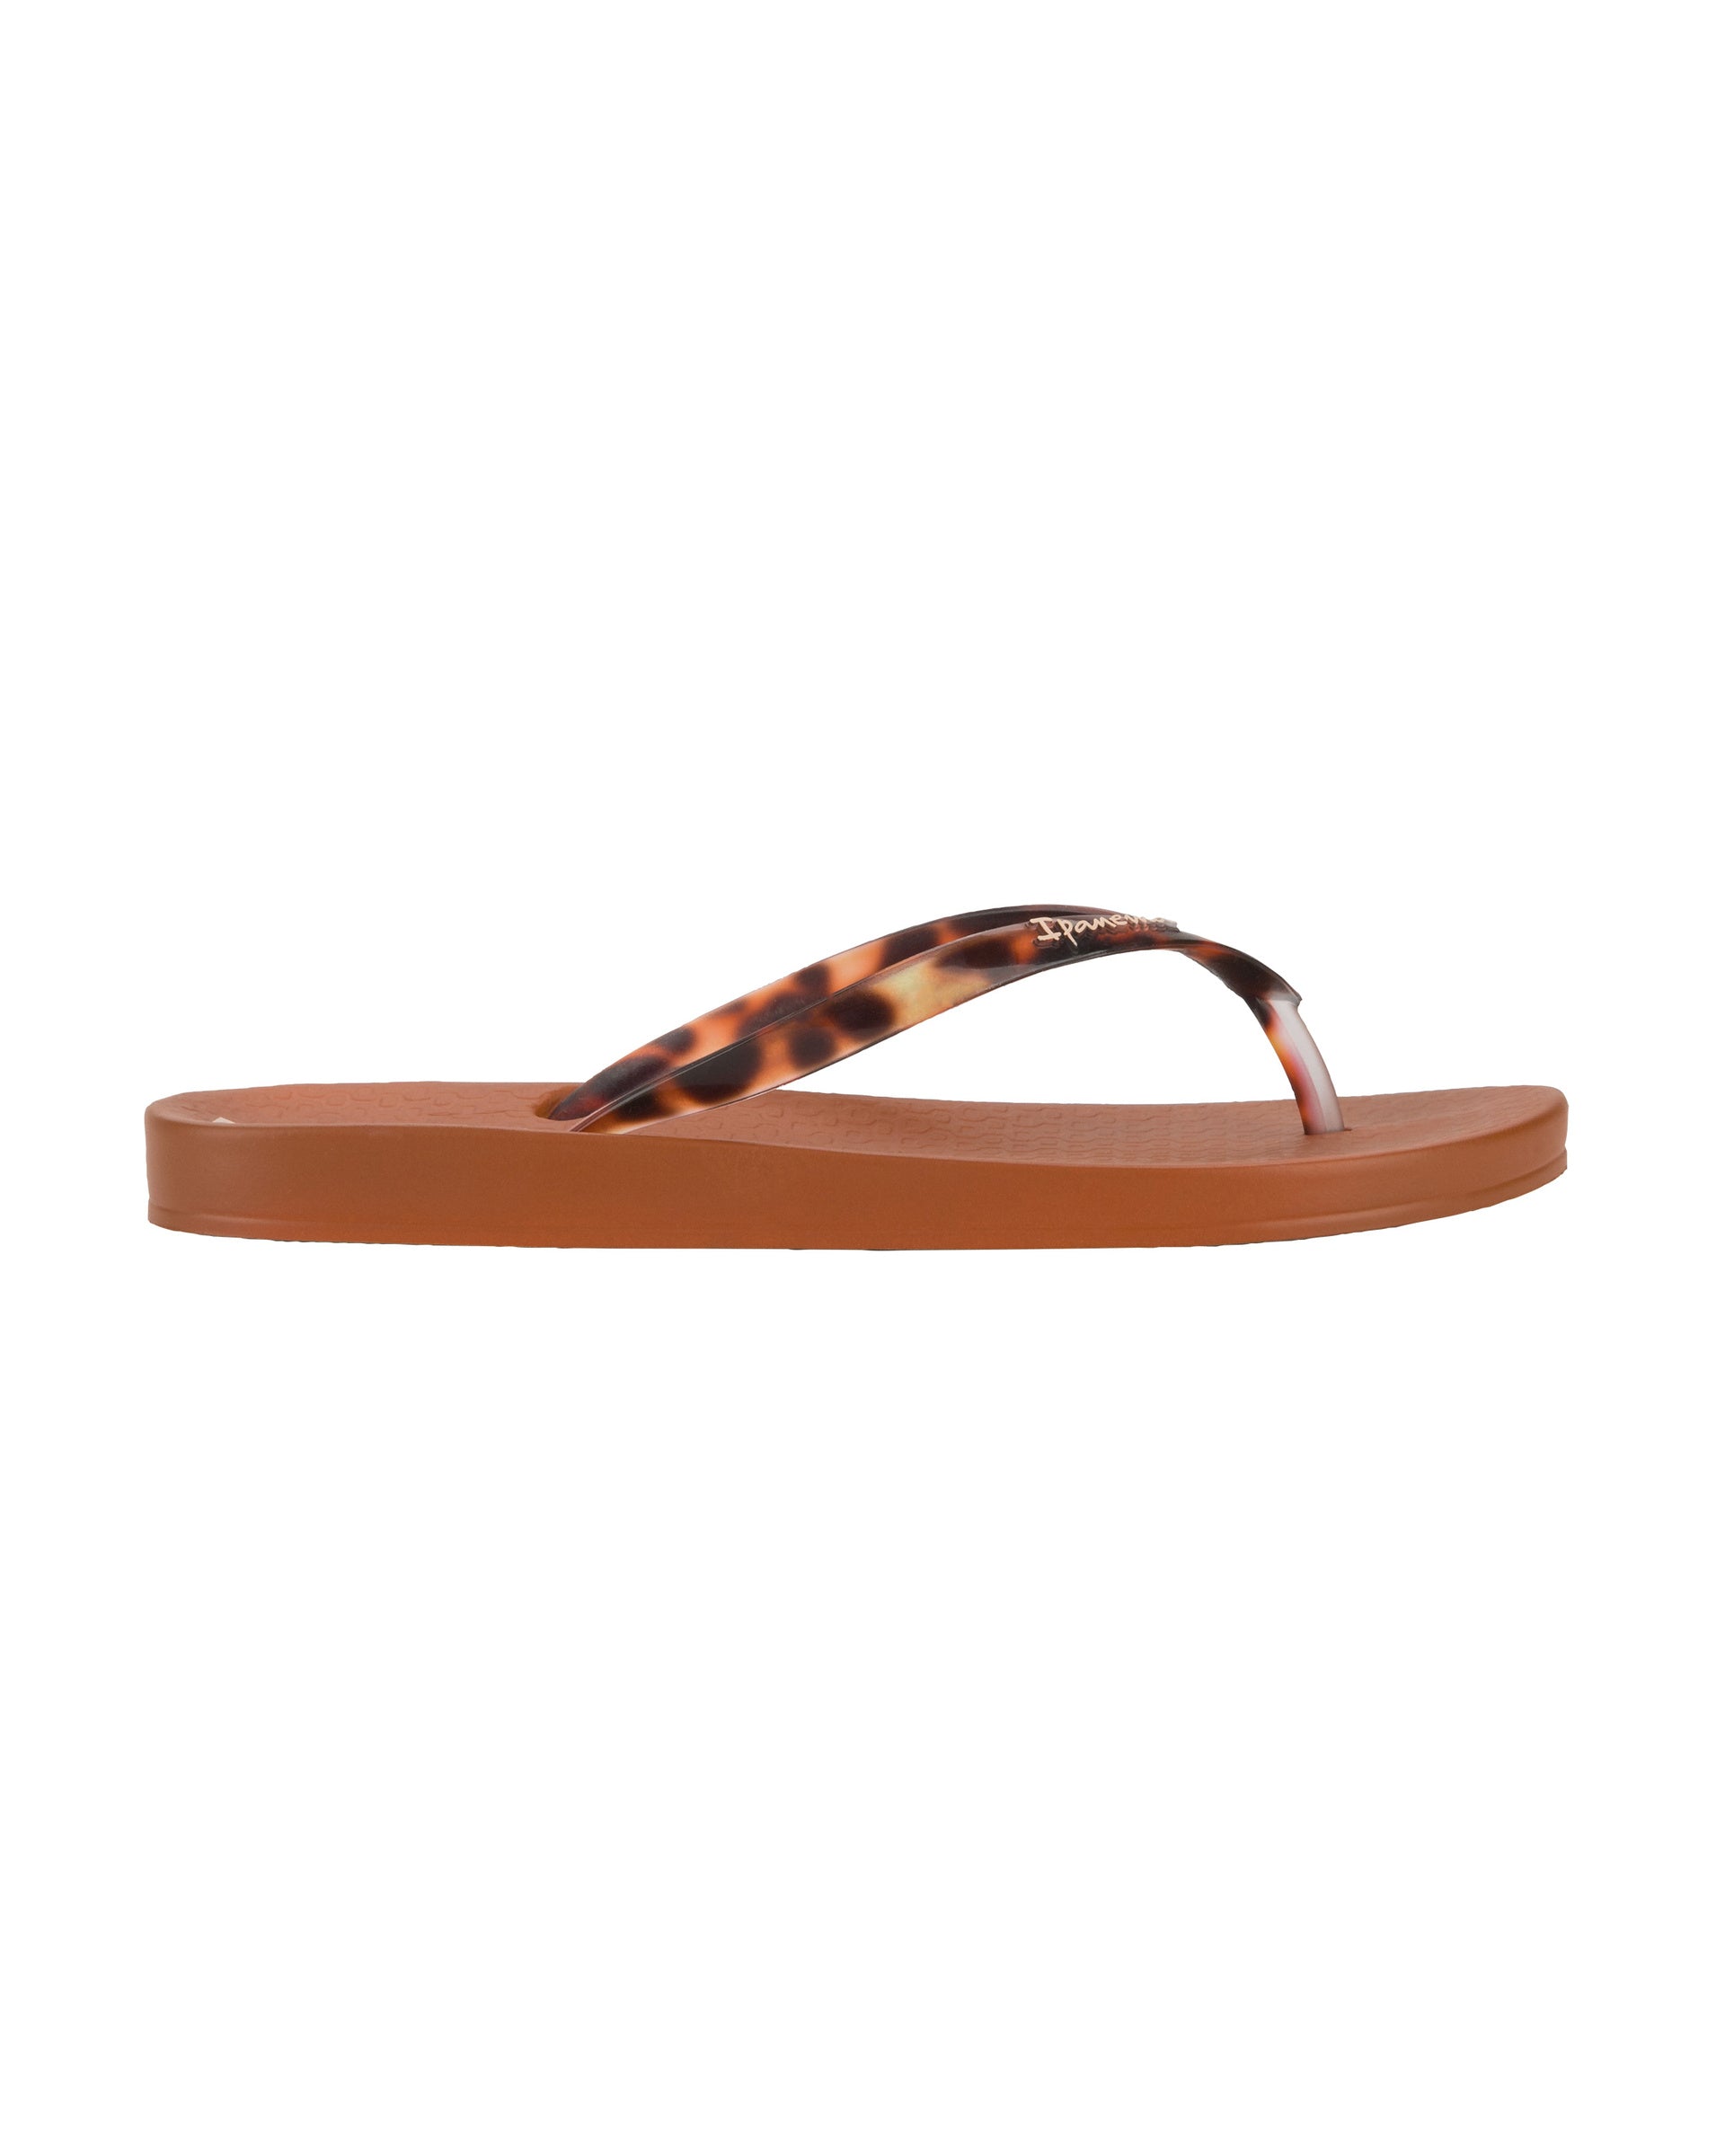 Outer side view of a brown Ipanema Ana Connect women's flip flop with brown tortoiseshell  color strap.